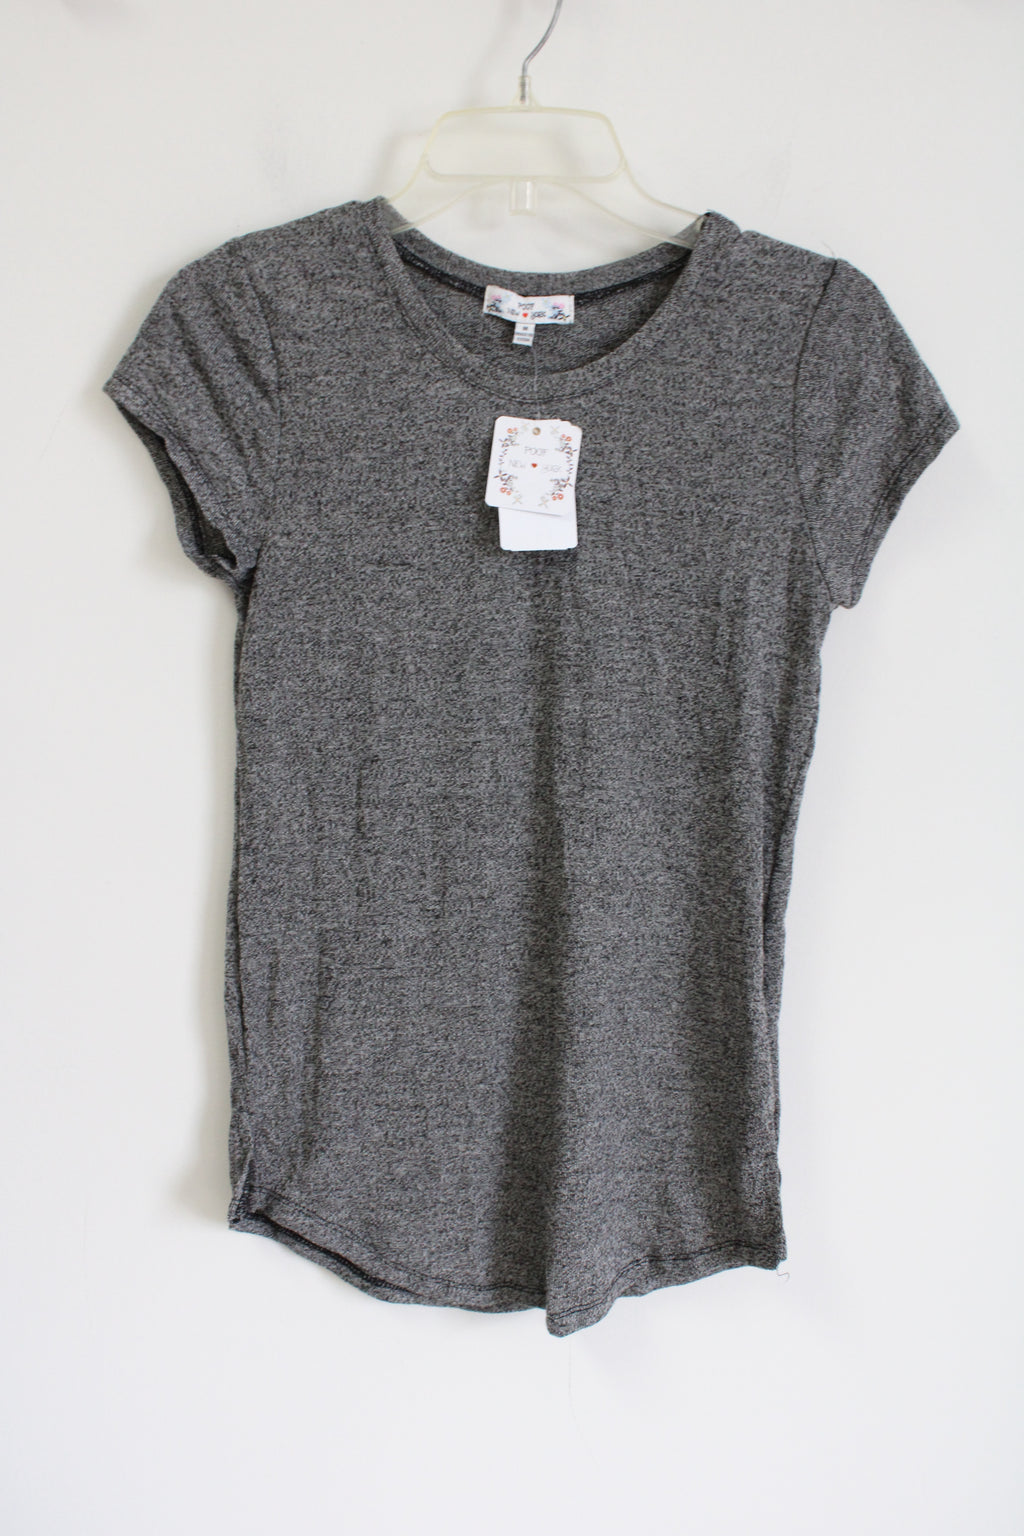 NEW Poof New York Gray Knit Tee | M